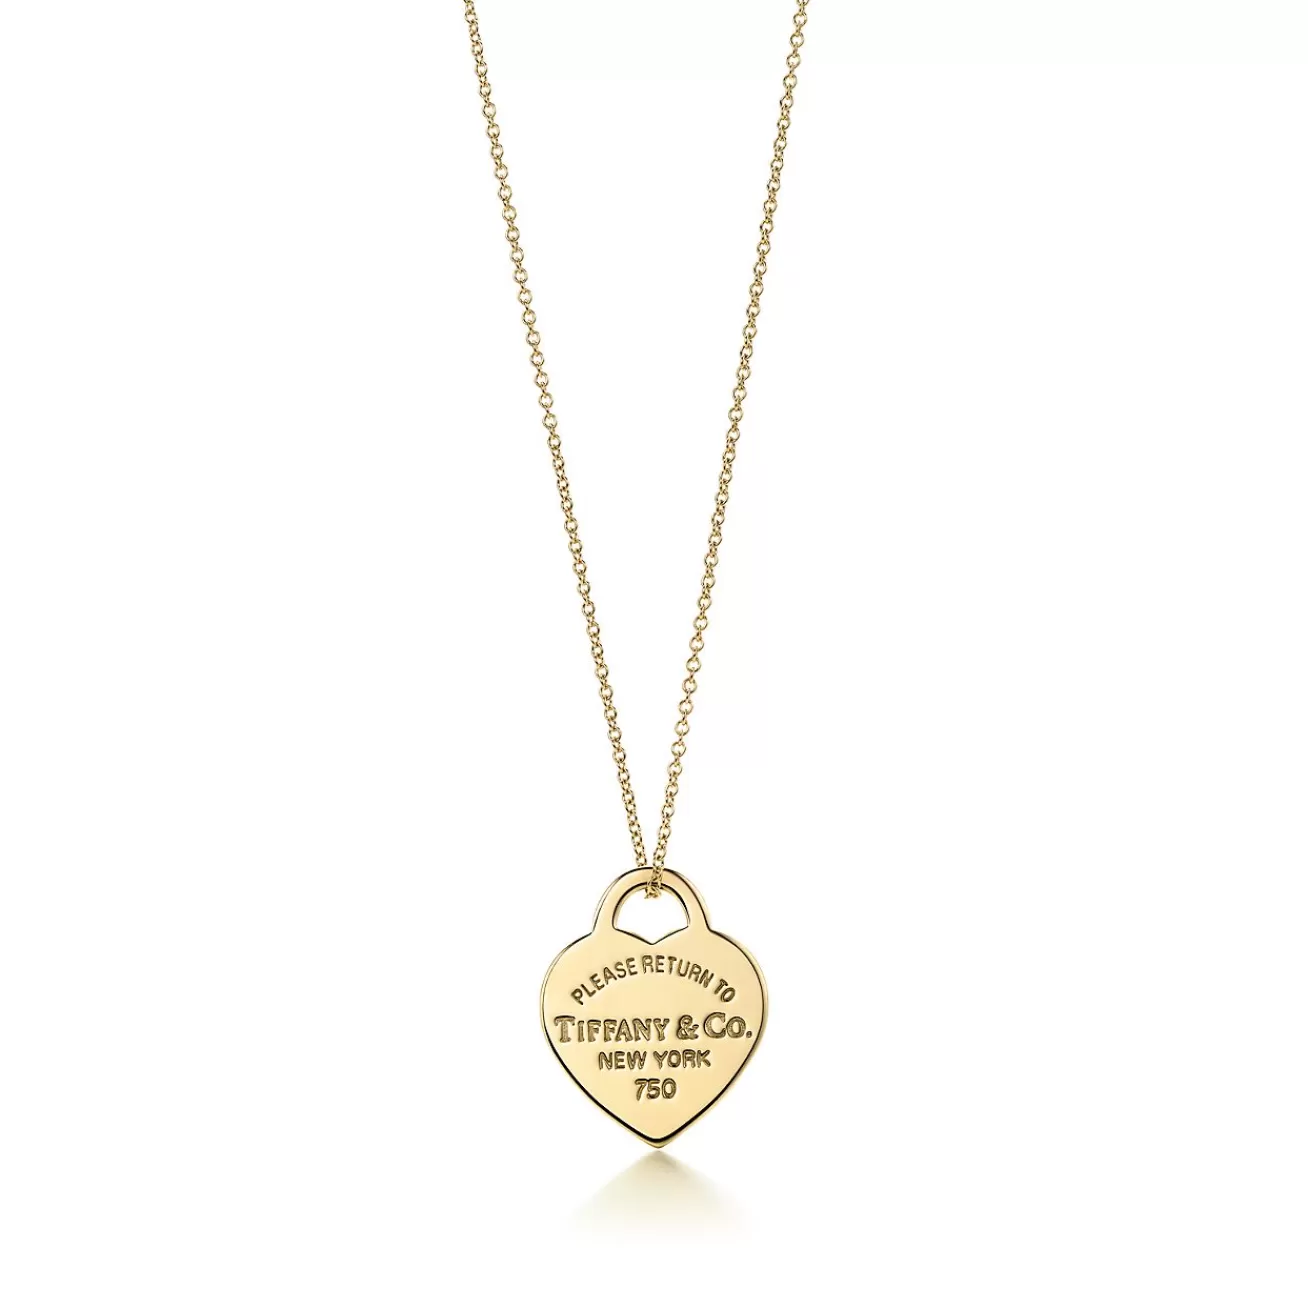 Tiffany & Co. Return to Tiffany® heart tag pendant in 18k gold, small. | ^ Necklaces & Pendants | Gifts for Her